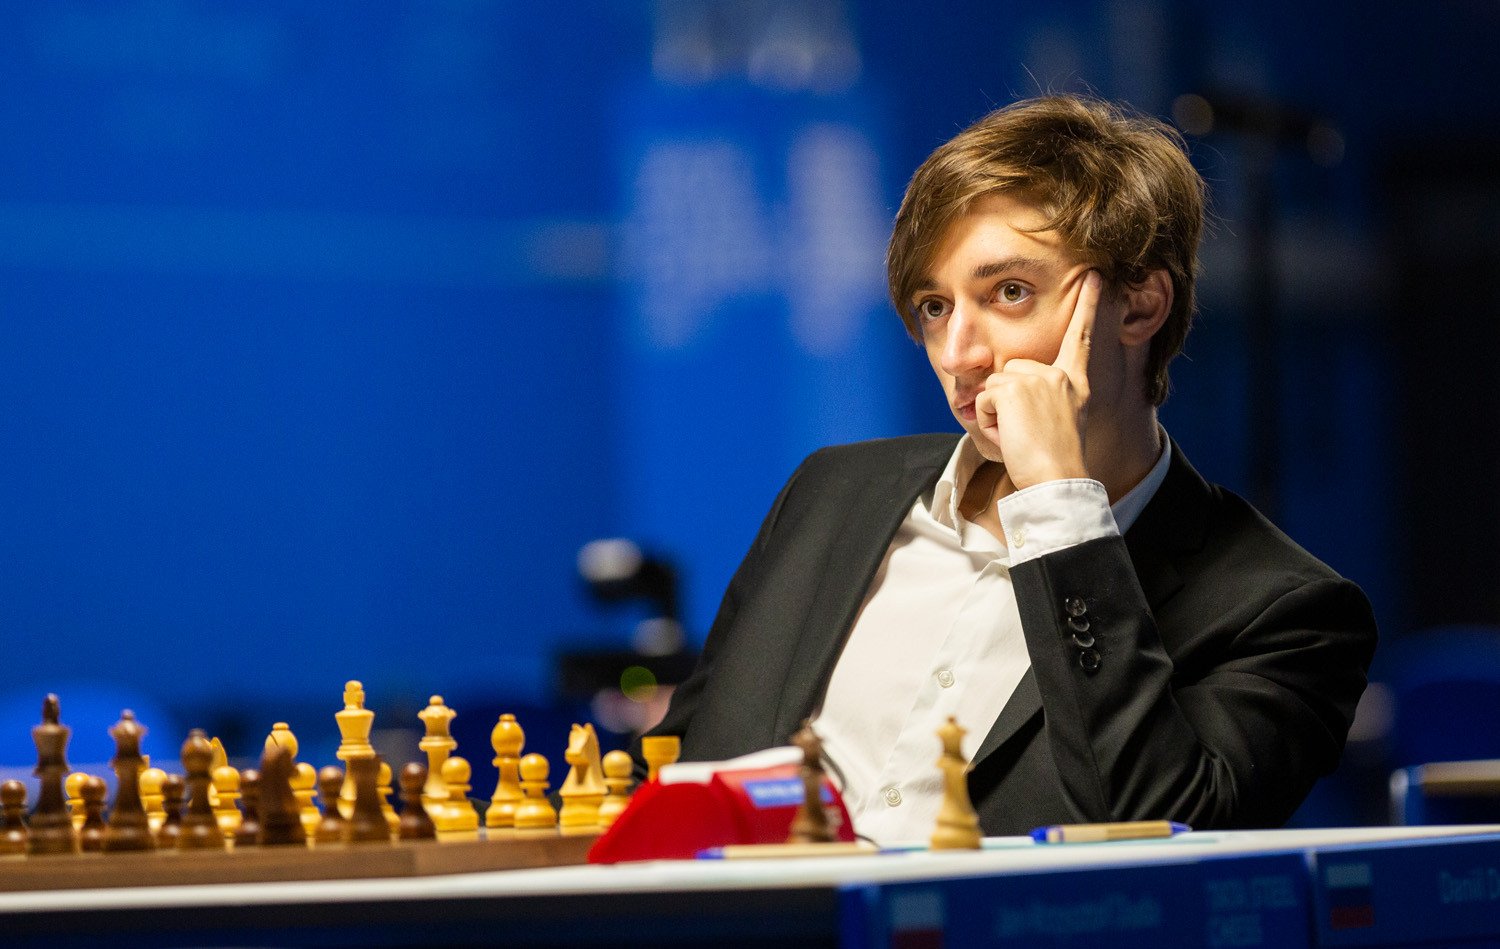 Caruana and Mamedyarov Battle for the Lead in Round 10